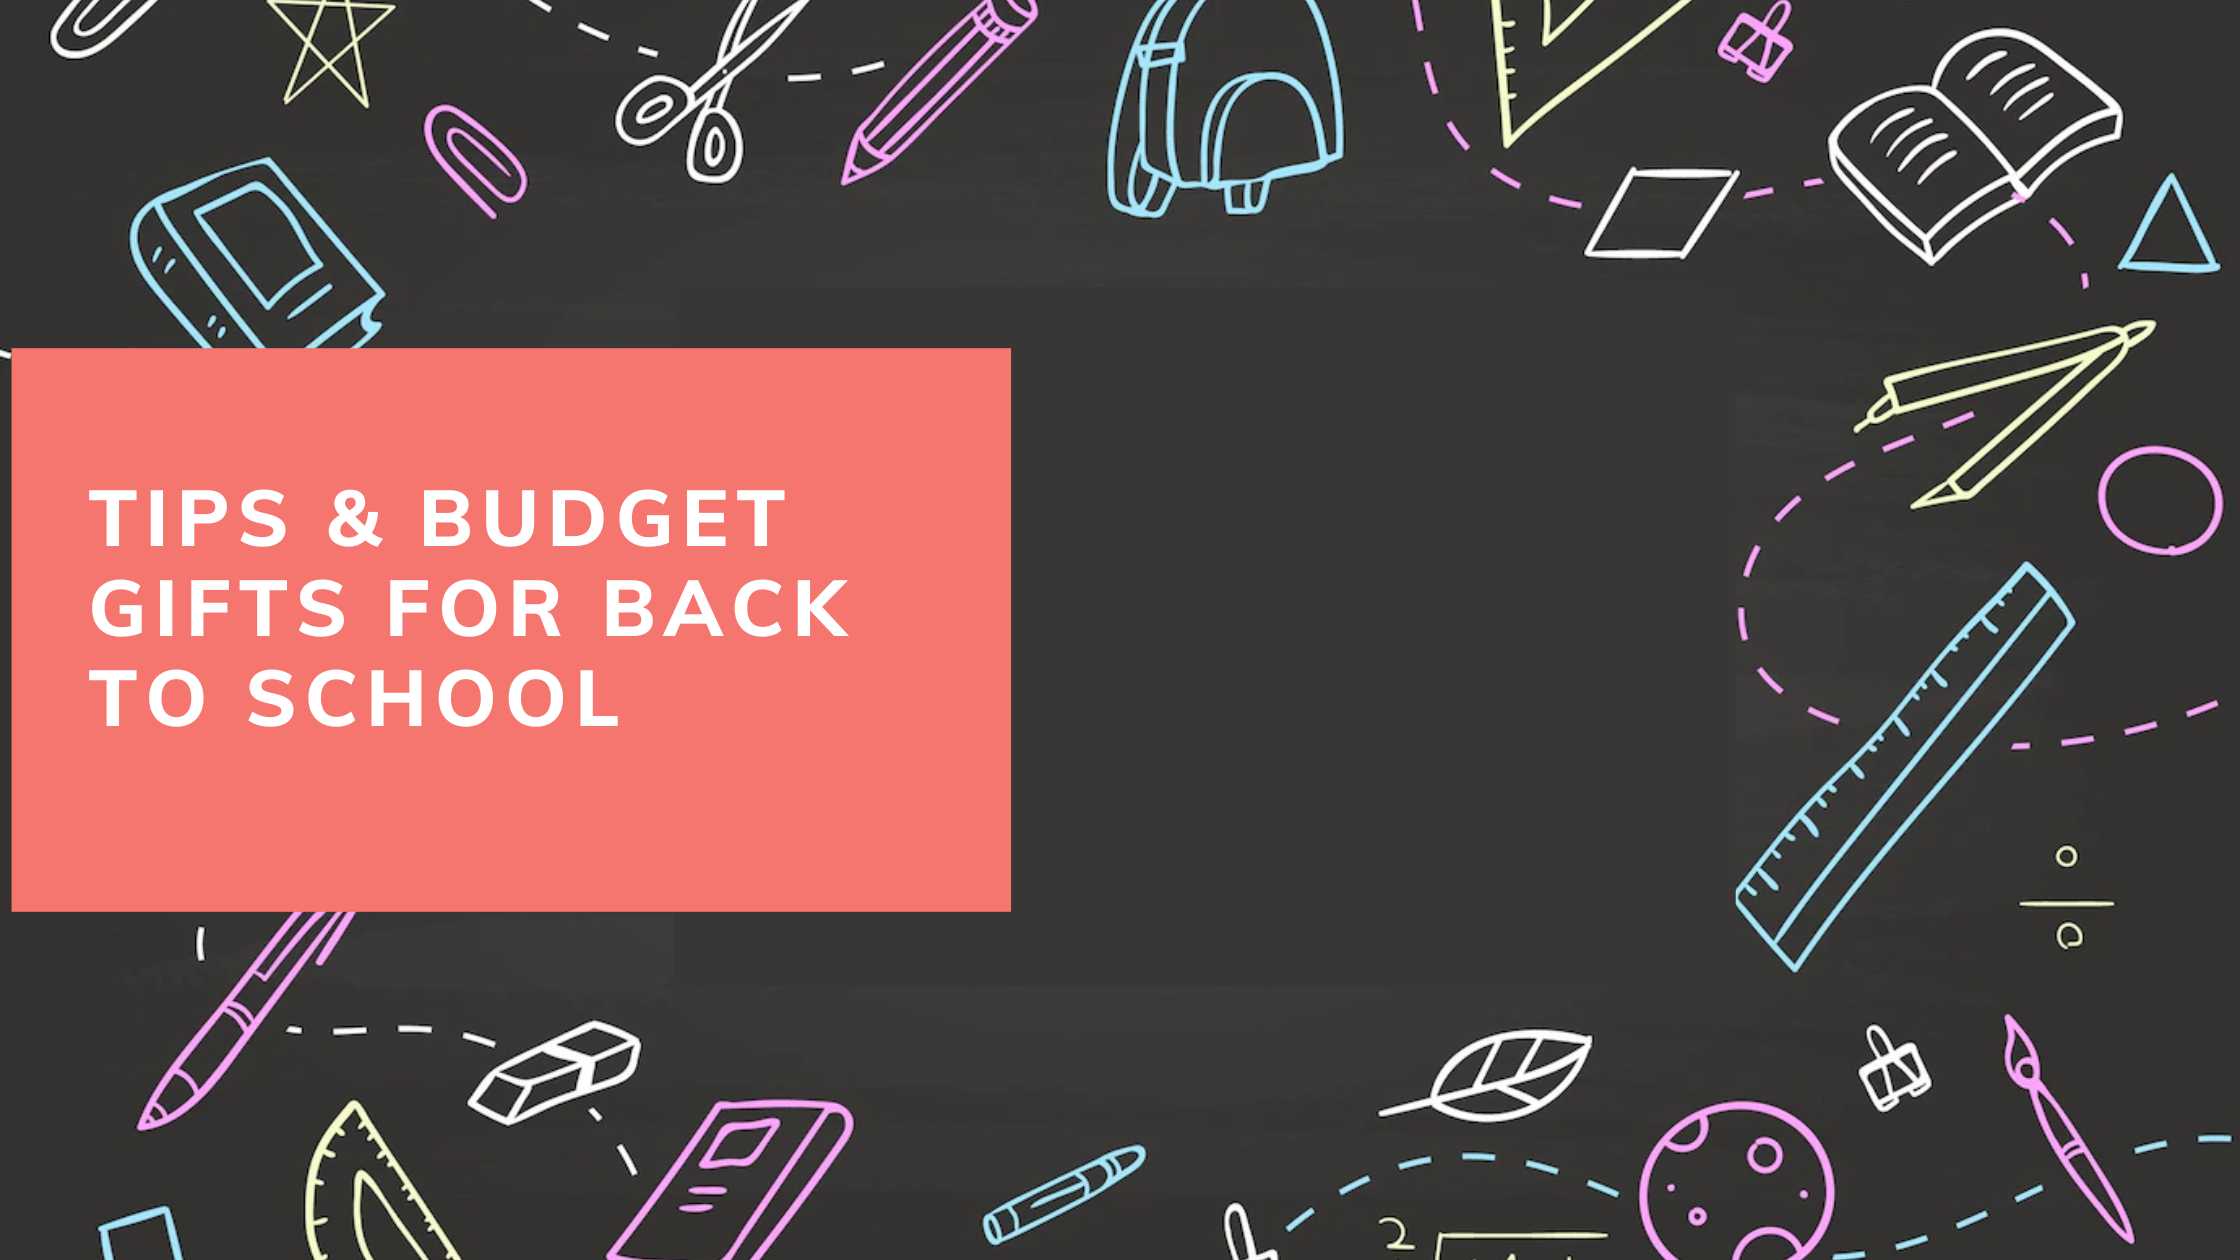 Tips & Budget Gifts for Back to School